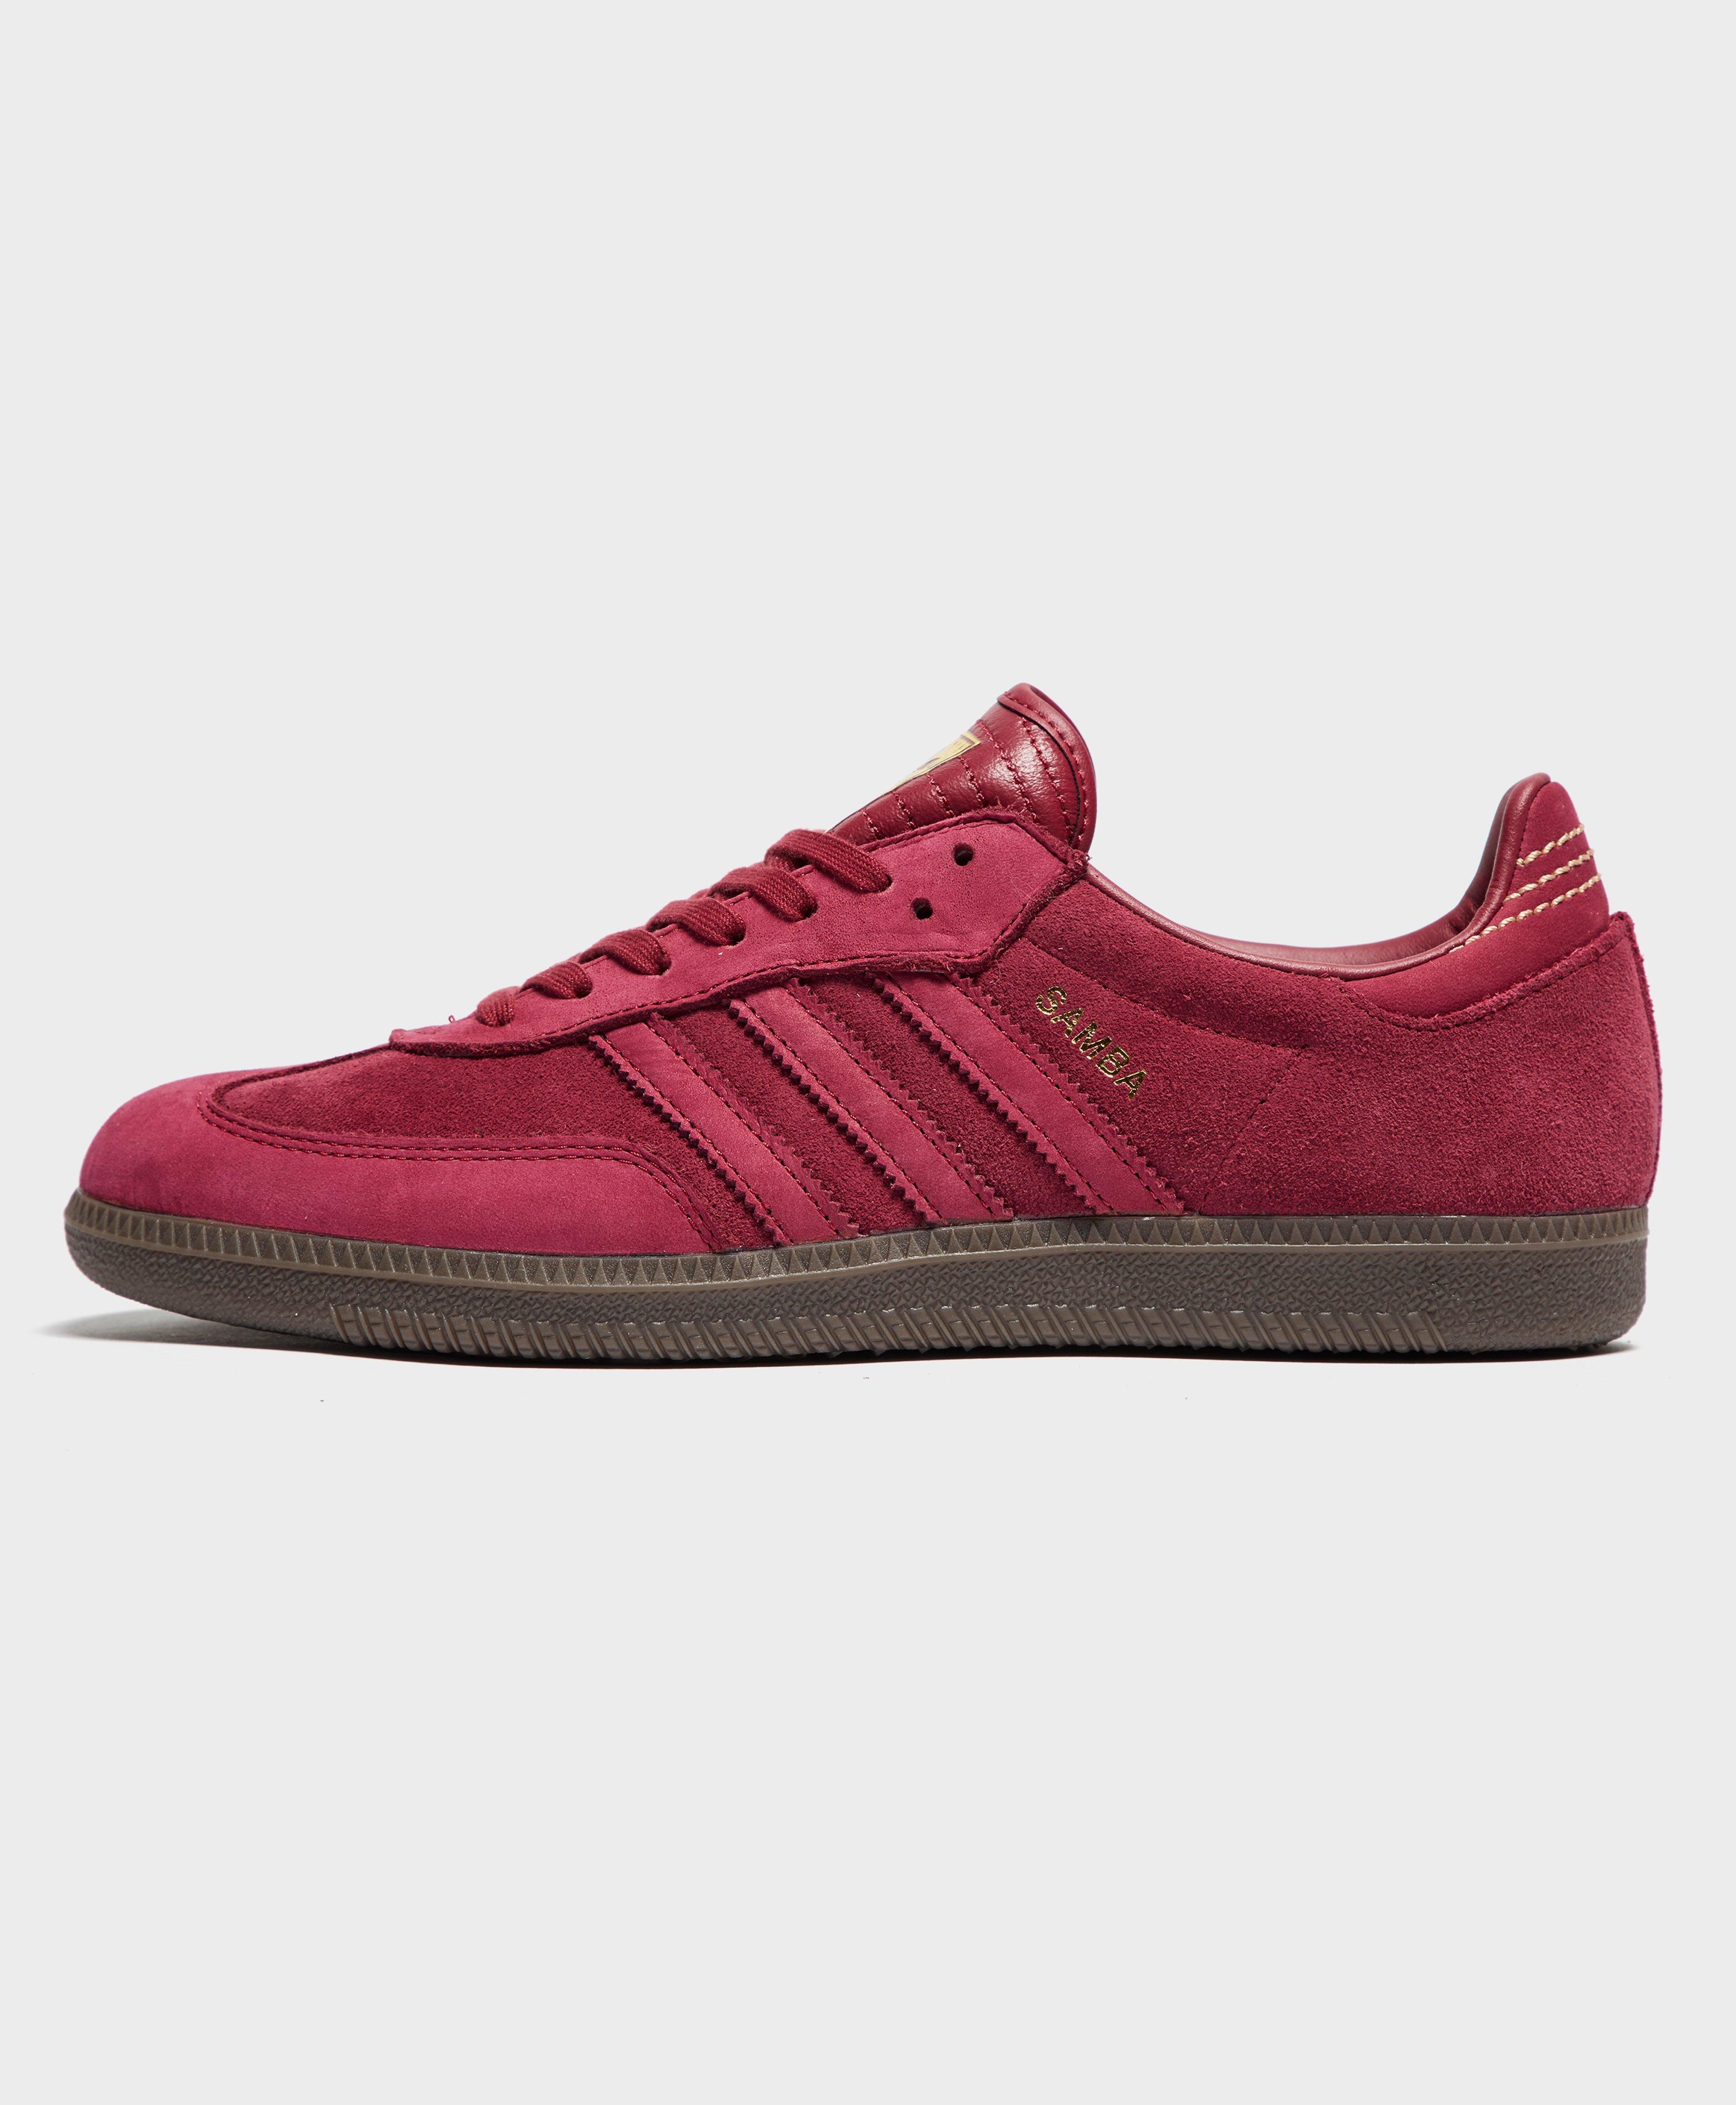 adidas Originals Suede Samba Fb Trainers Mystery Ruby/mystery Ruby/gold  Metallic in Red for Men - Lyst